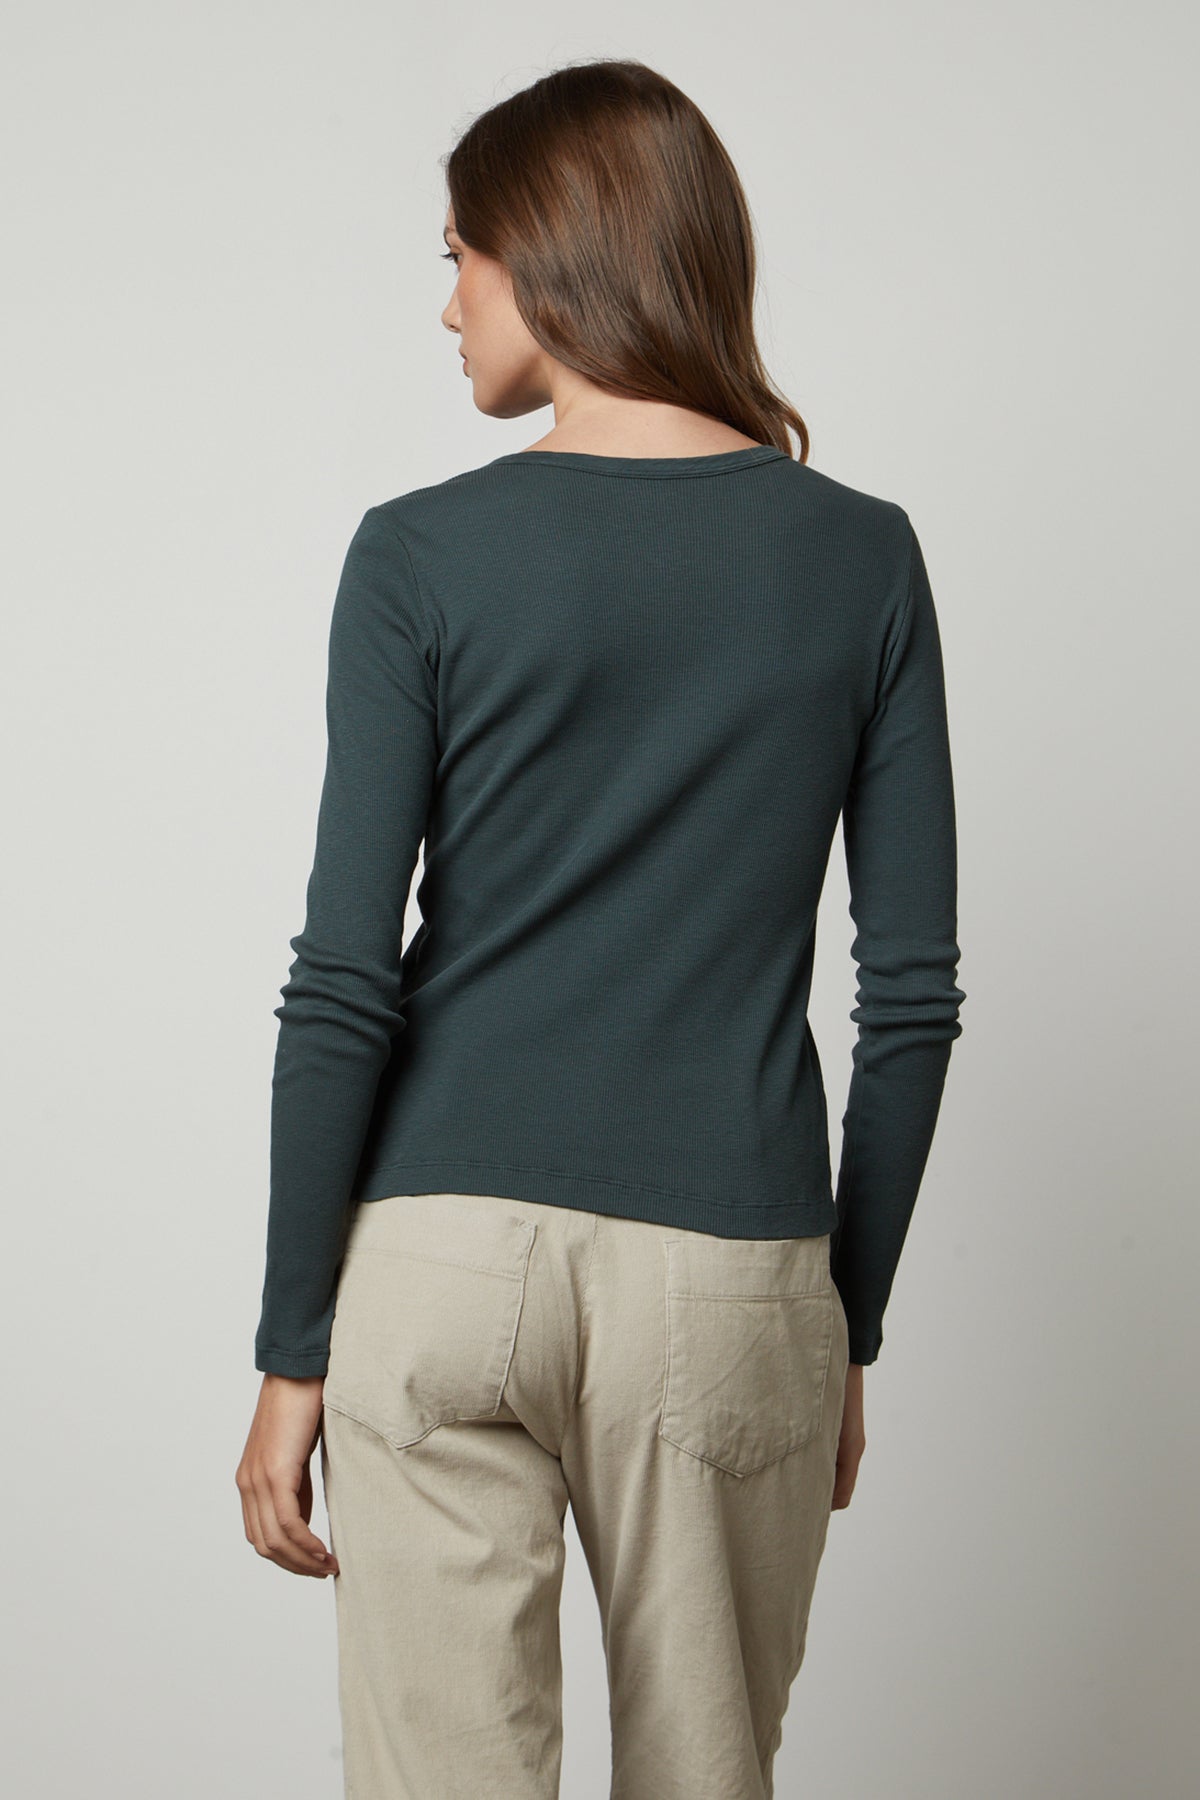 The back view of a woman wearing a Velvet by Graham & Spencer BAYLER RIBBED SCOOP NECK TEE top and khaki pants.-35206768427201